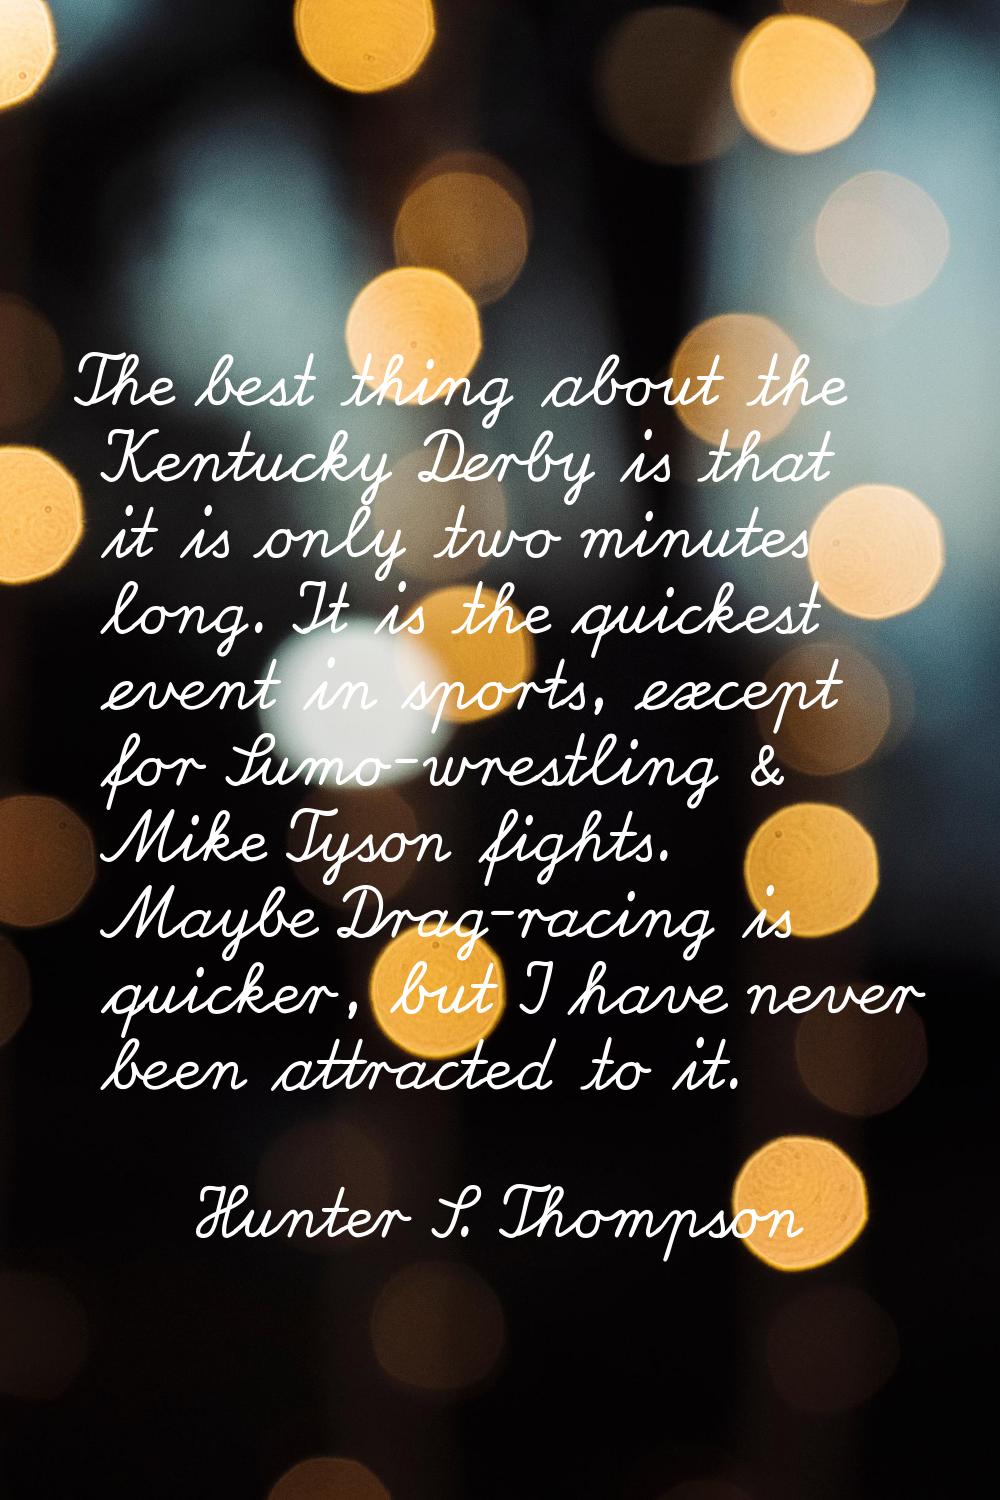 The best thing about the Kentucky Derby is that it is only two minutes long. It is the quickest eve